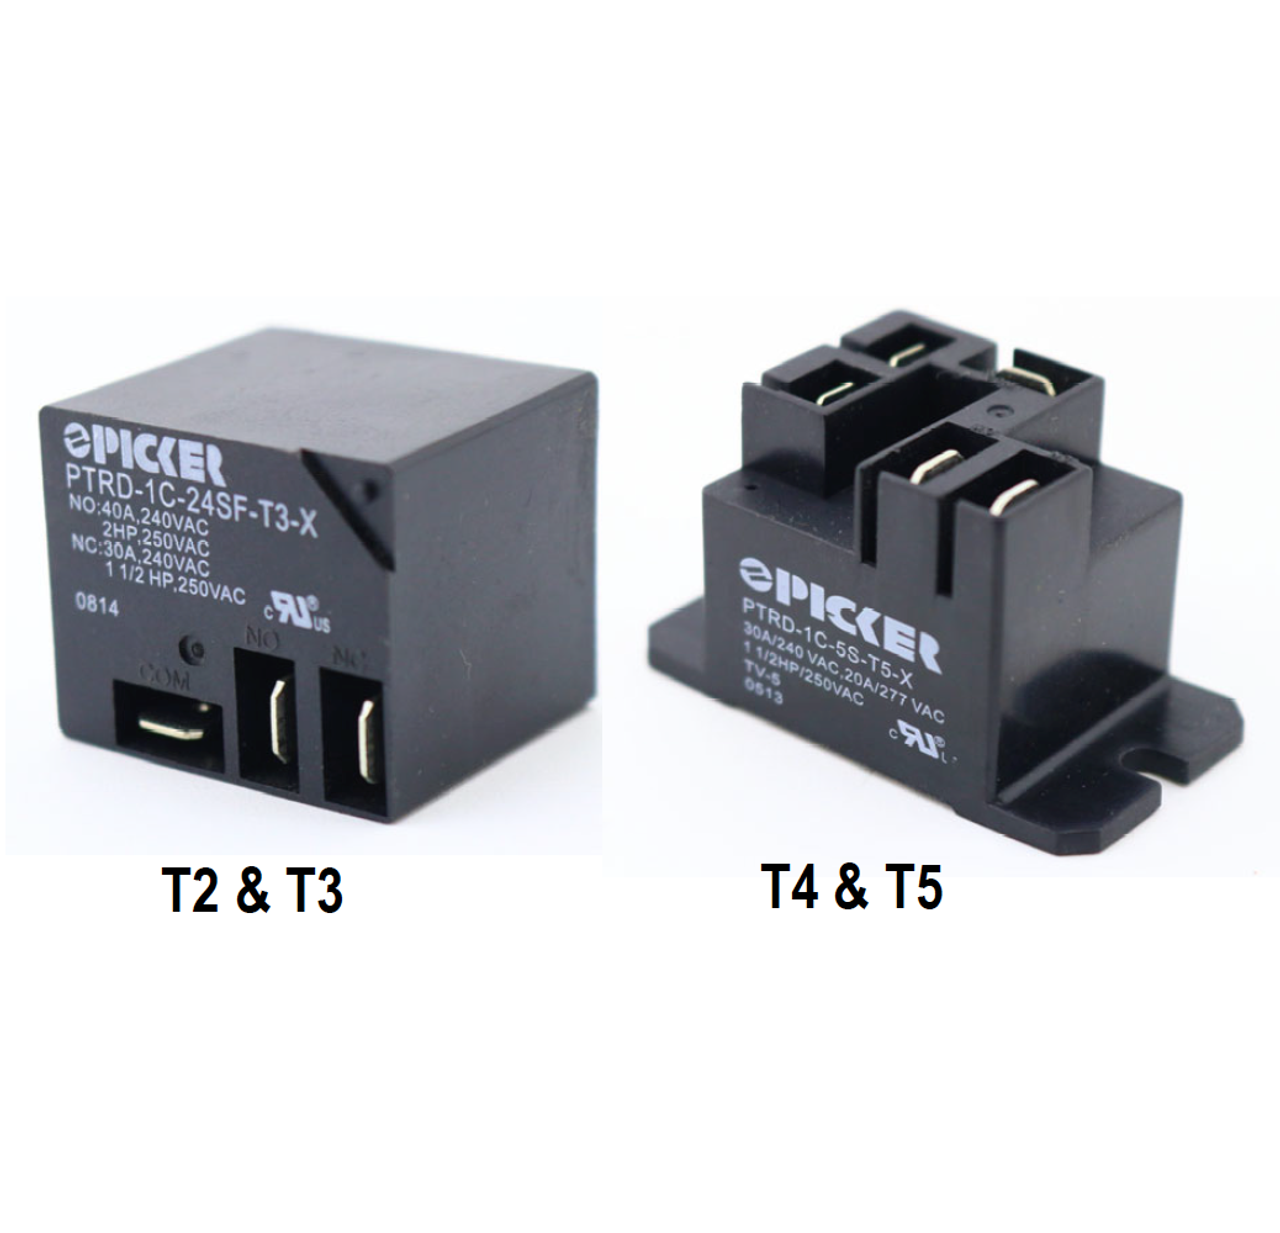 Picker PTRD-1A-9S-T5-X-A0.6G Power Relays